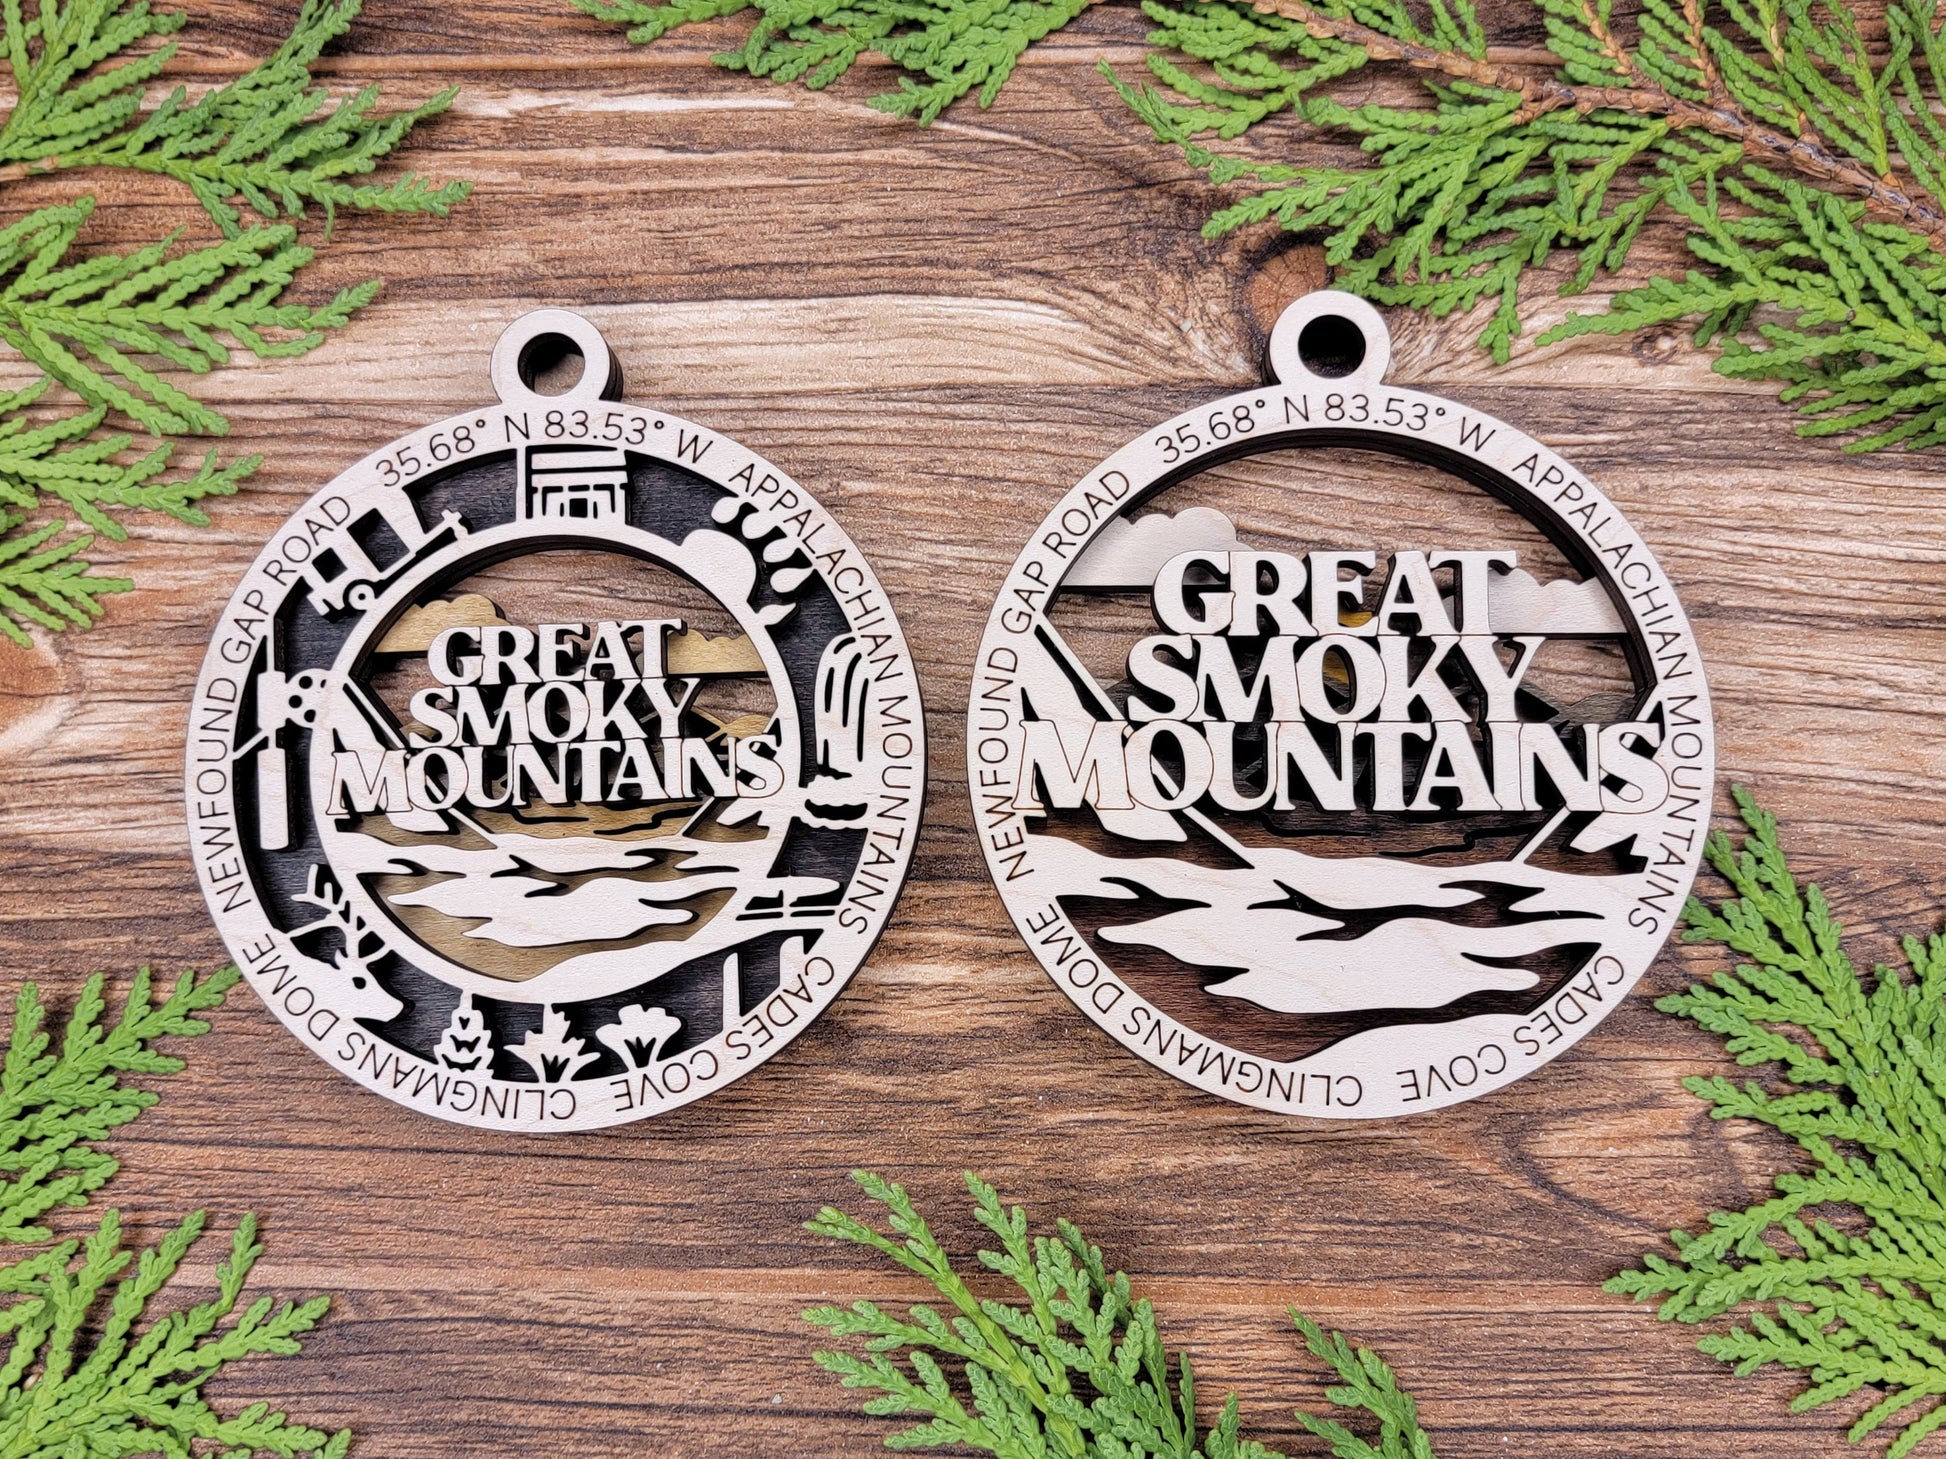 Great Smoky Mountains Park Ornament - Includes 2 Ornaments - Laser Design SVG, PDF, AI File Download - Tested On Glowforge and LightBurn